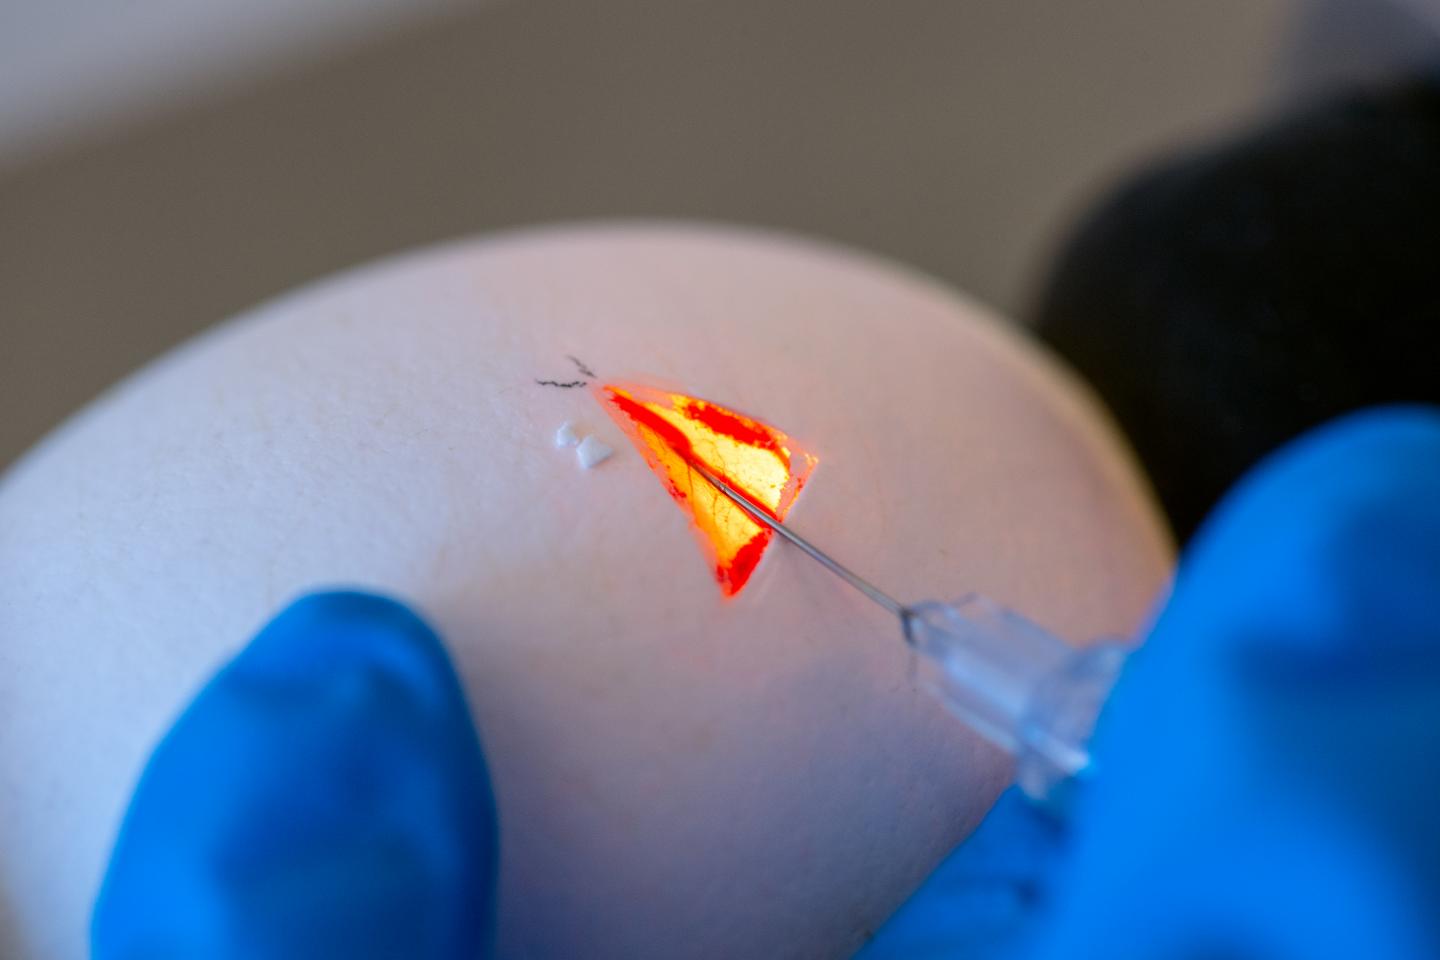 Chickens embryos with integrated genetic scissors